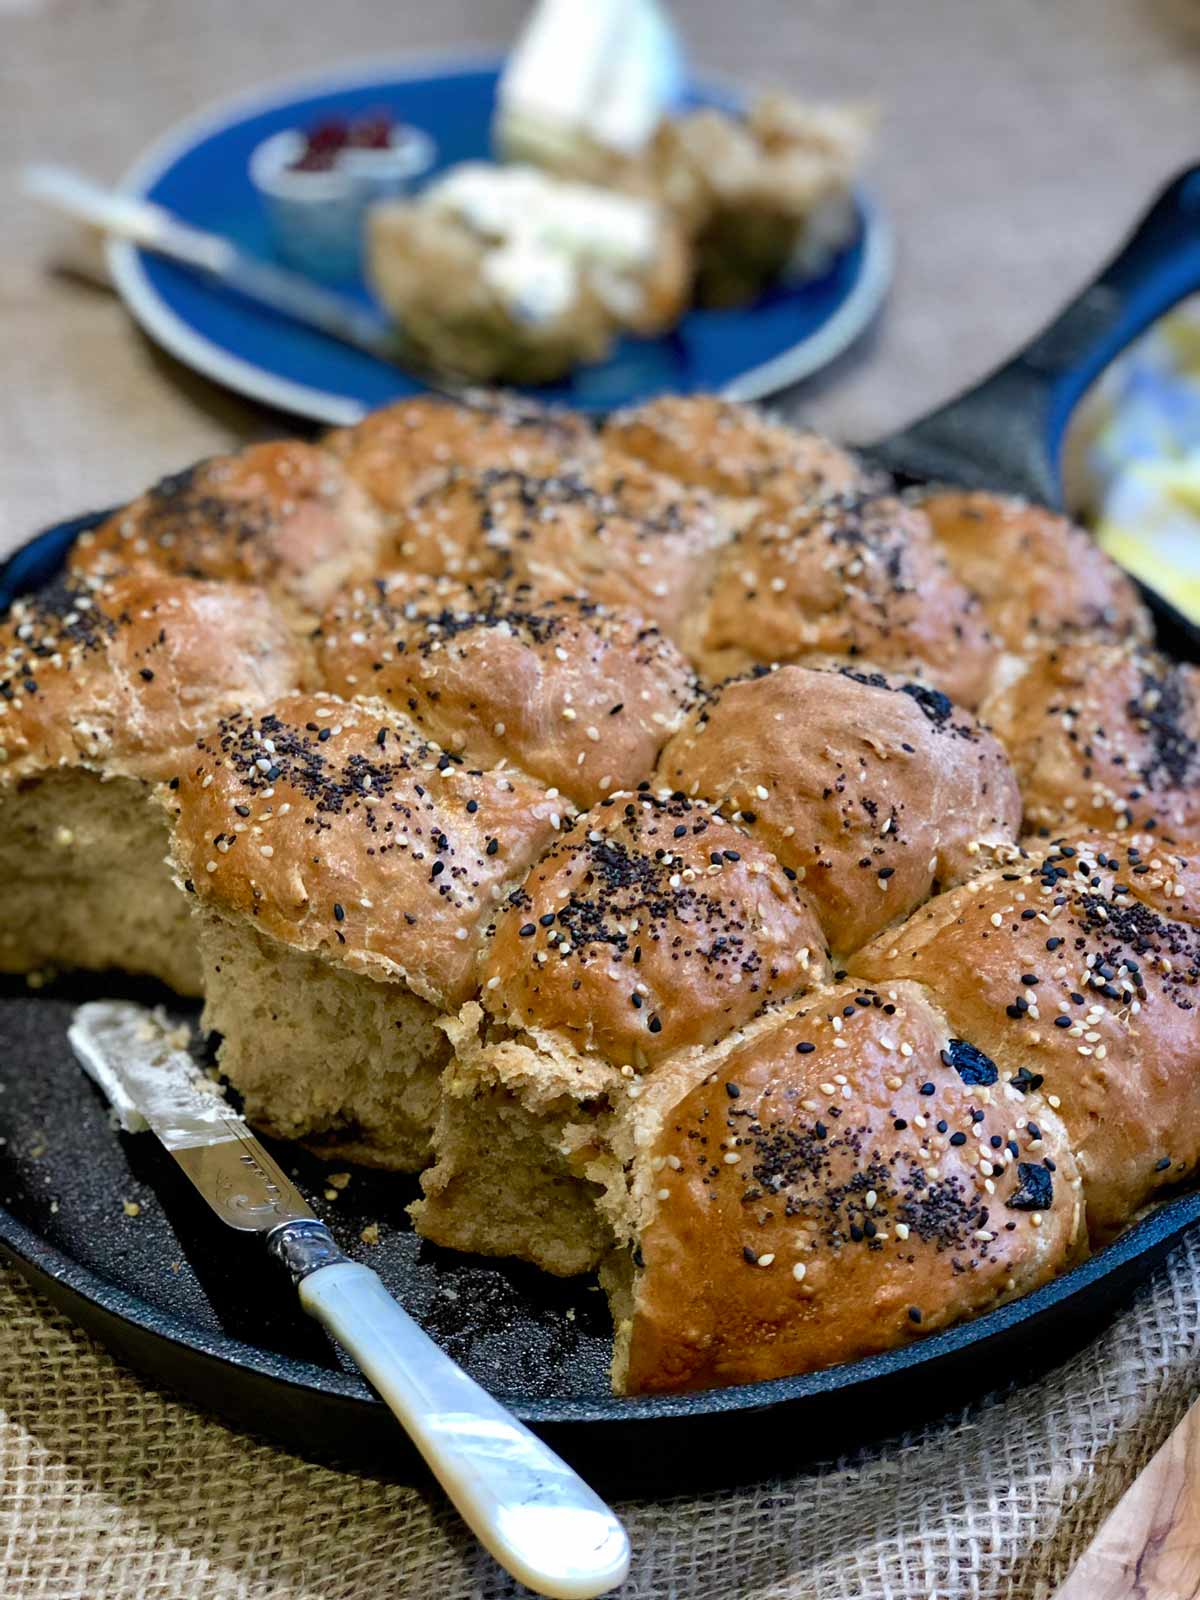 Bread rolls with olive, chia seeds and crushed black pepper